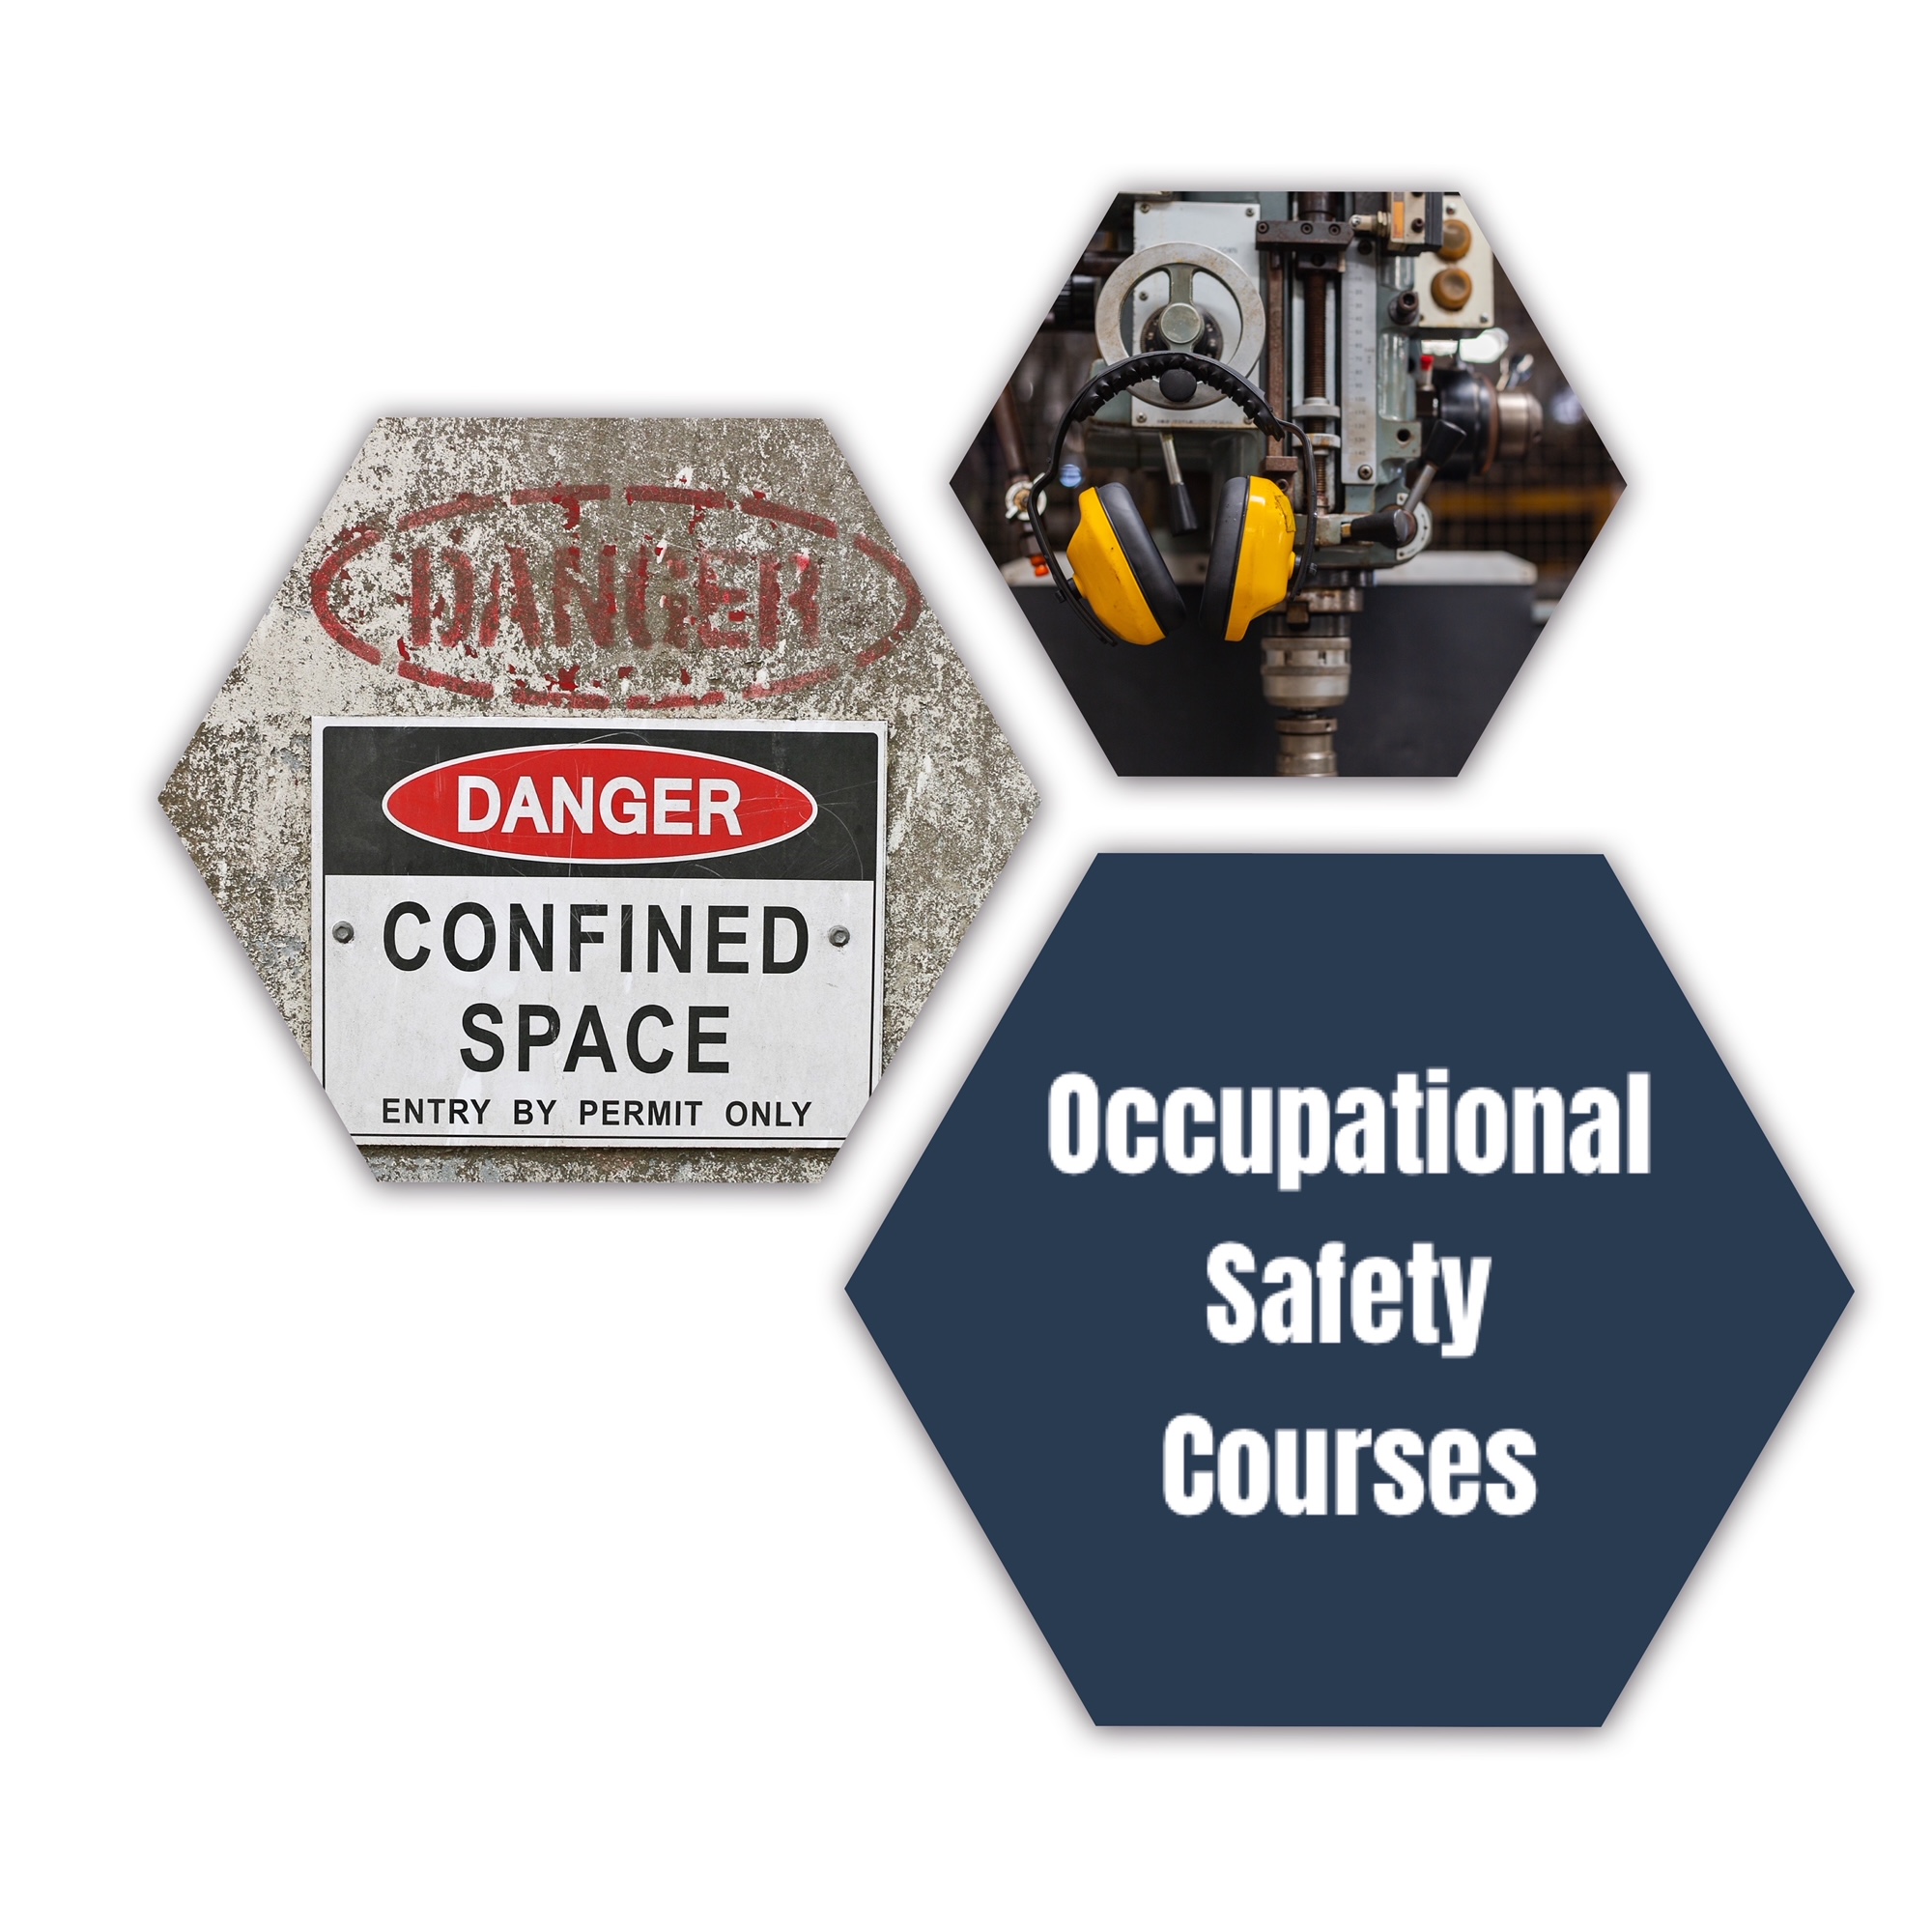 Occupational Safety Courses